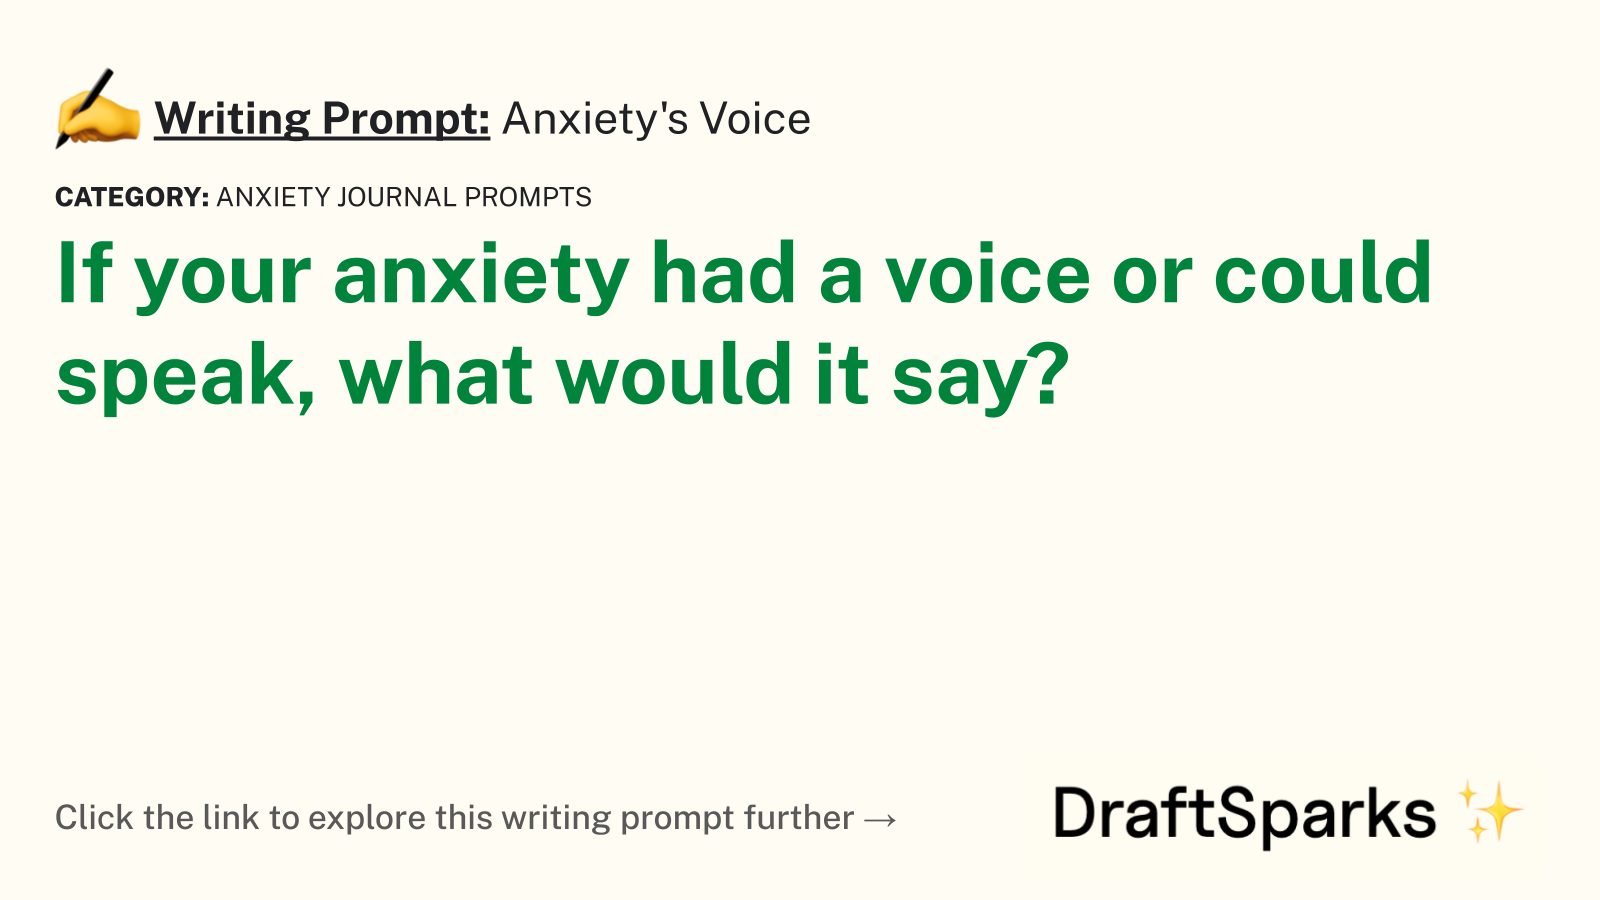 Anxiety’s Voice